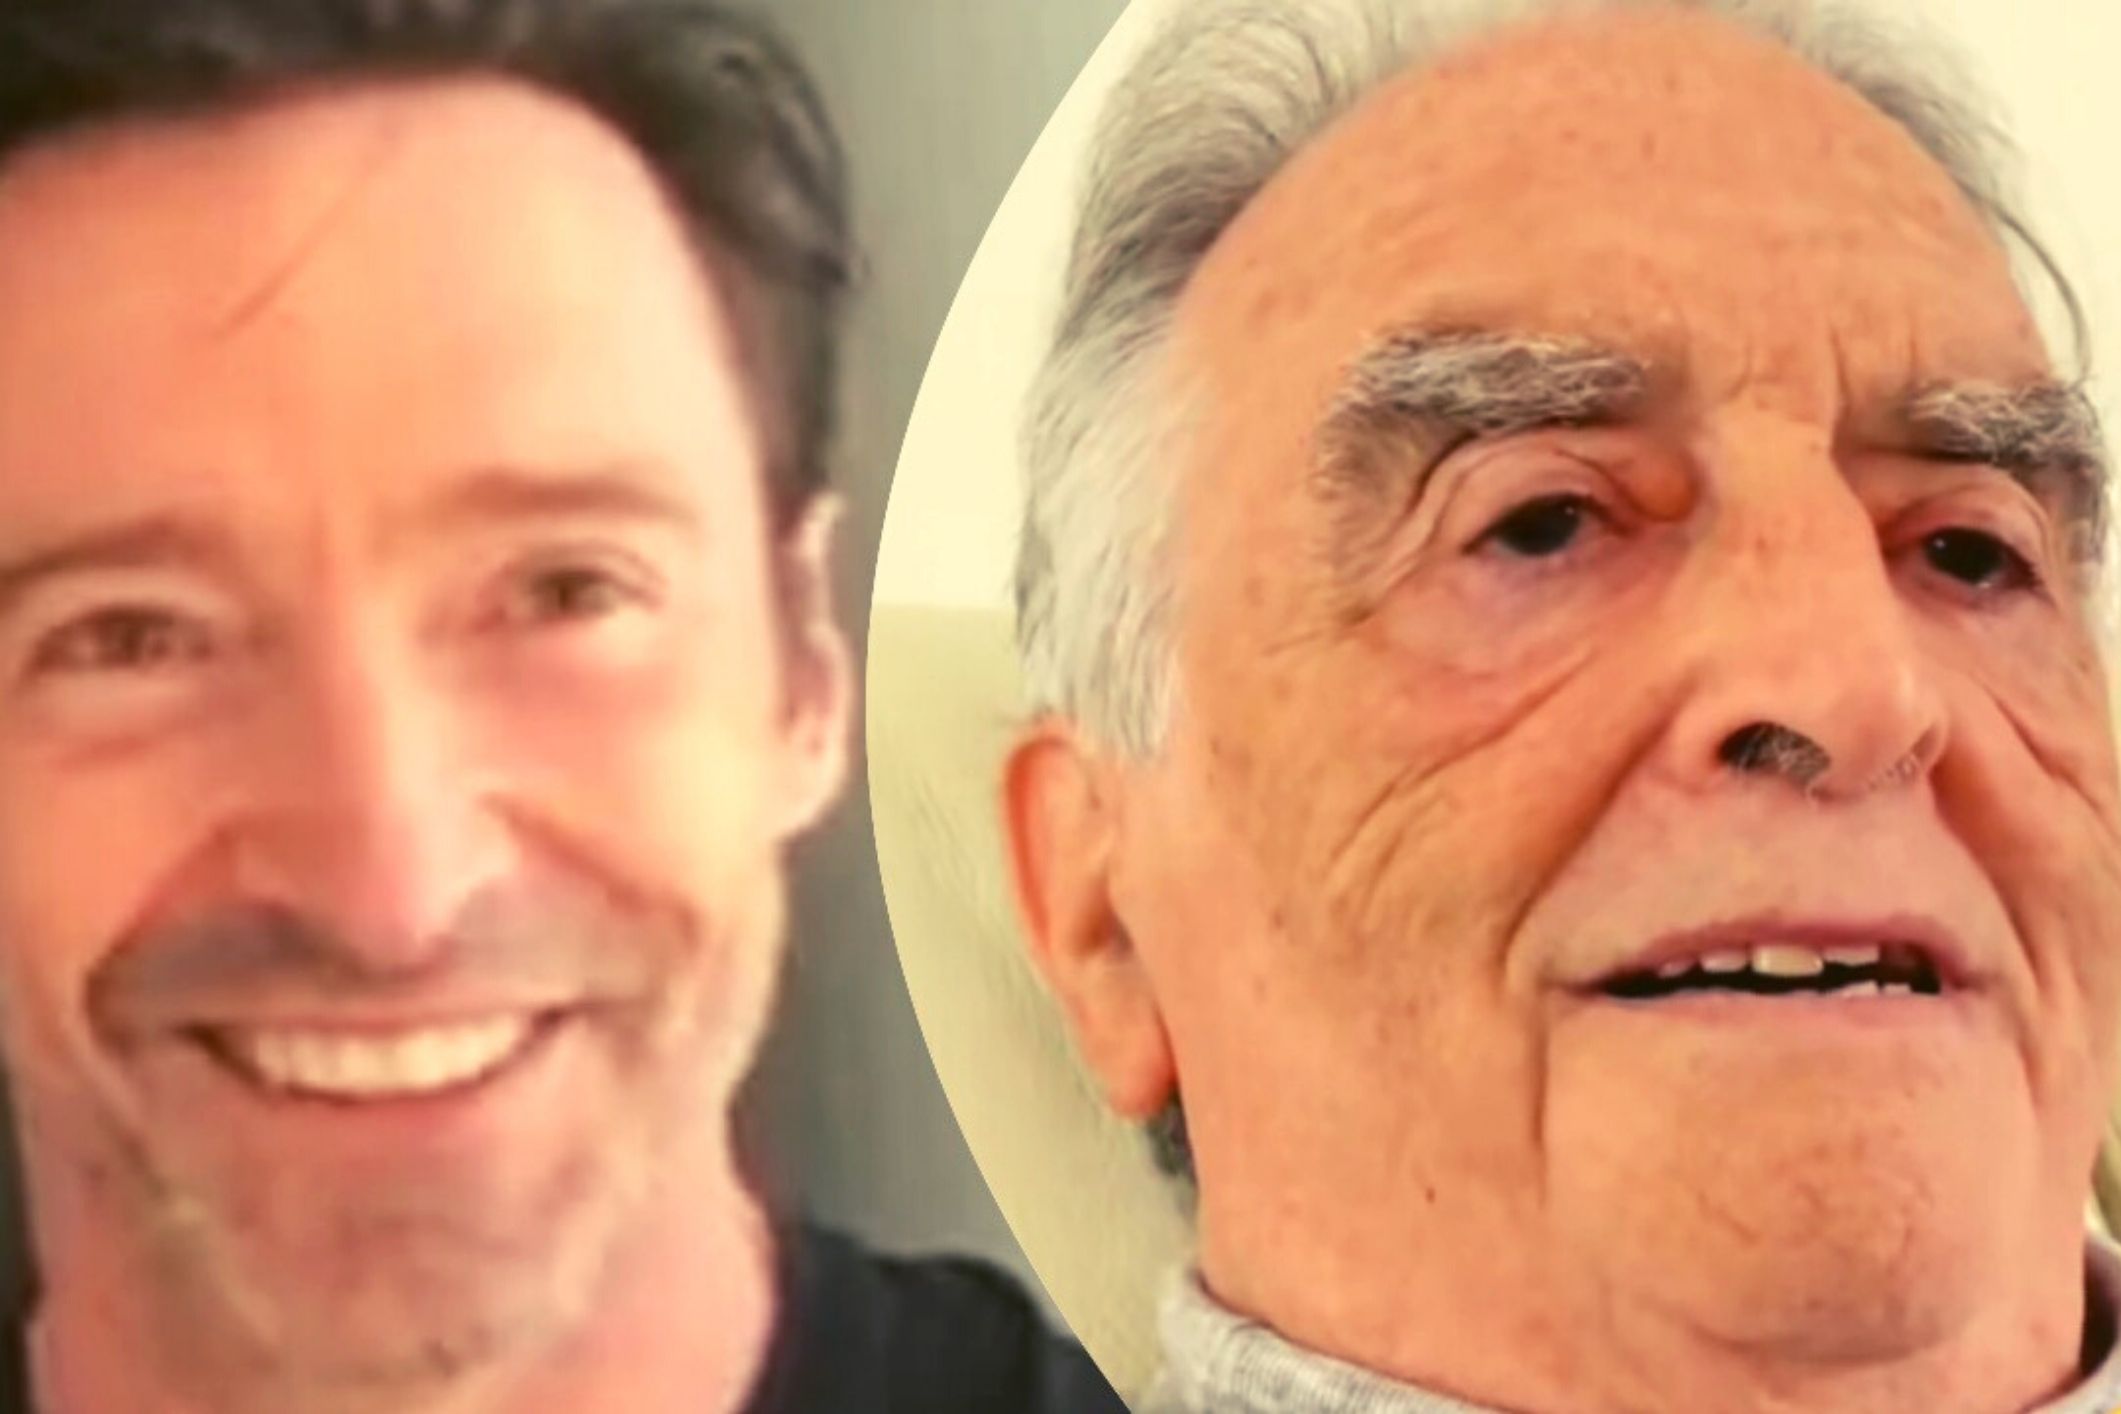 Hugh Jackman reacts to grandfather watching The Greatest Showman